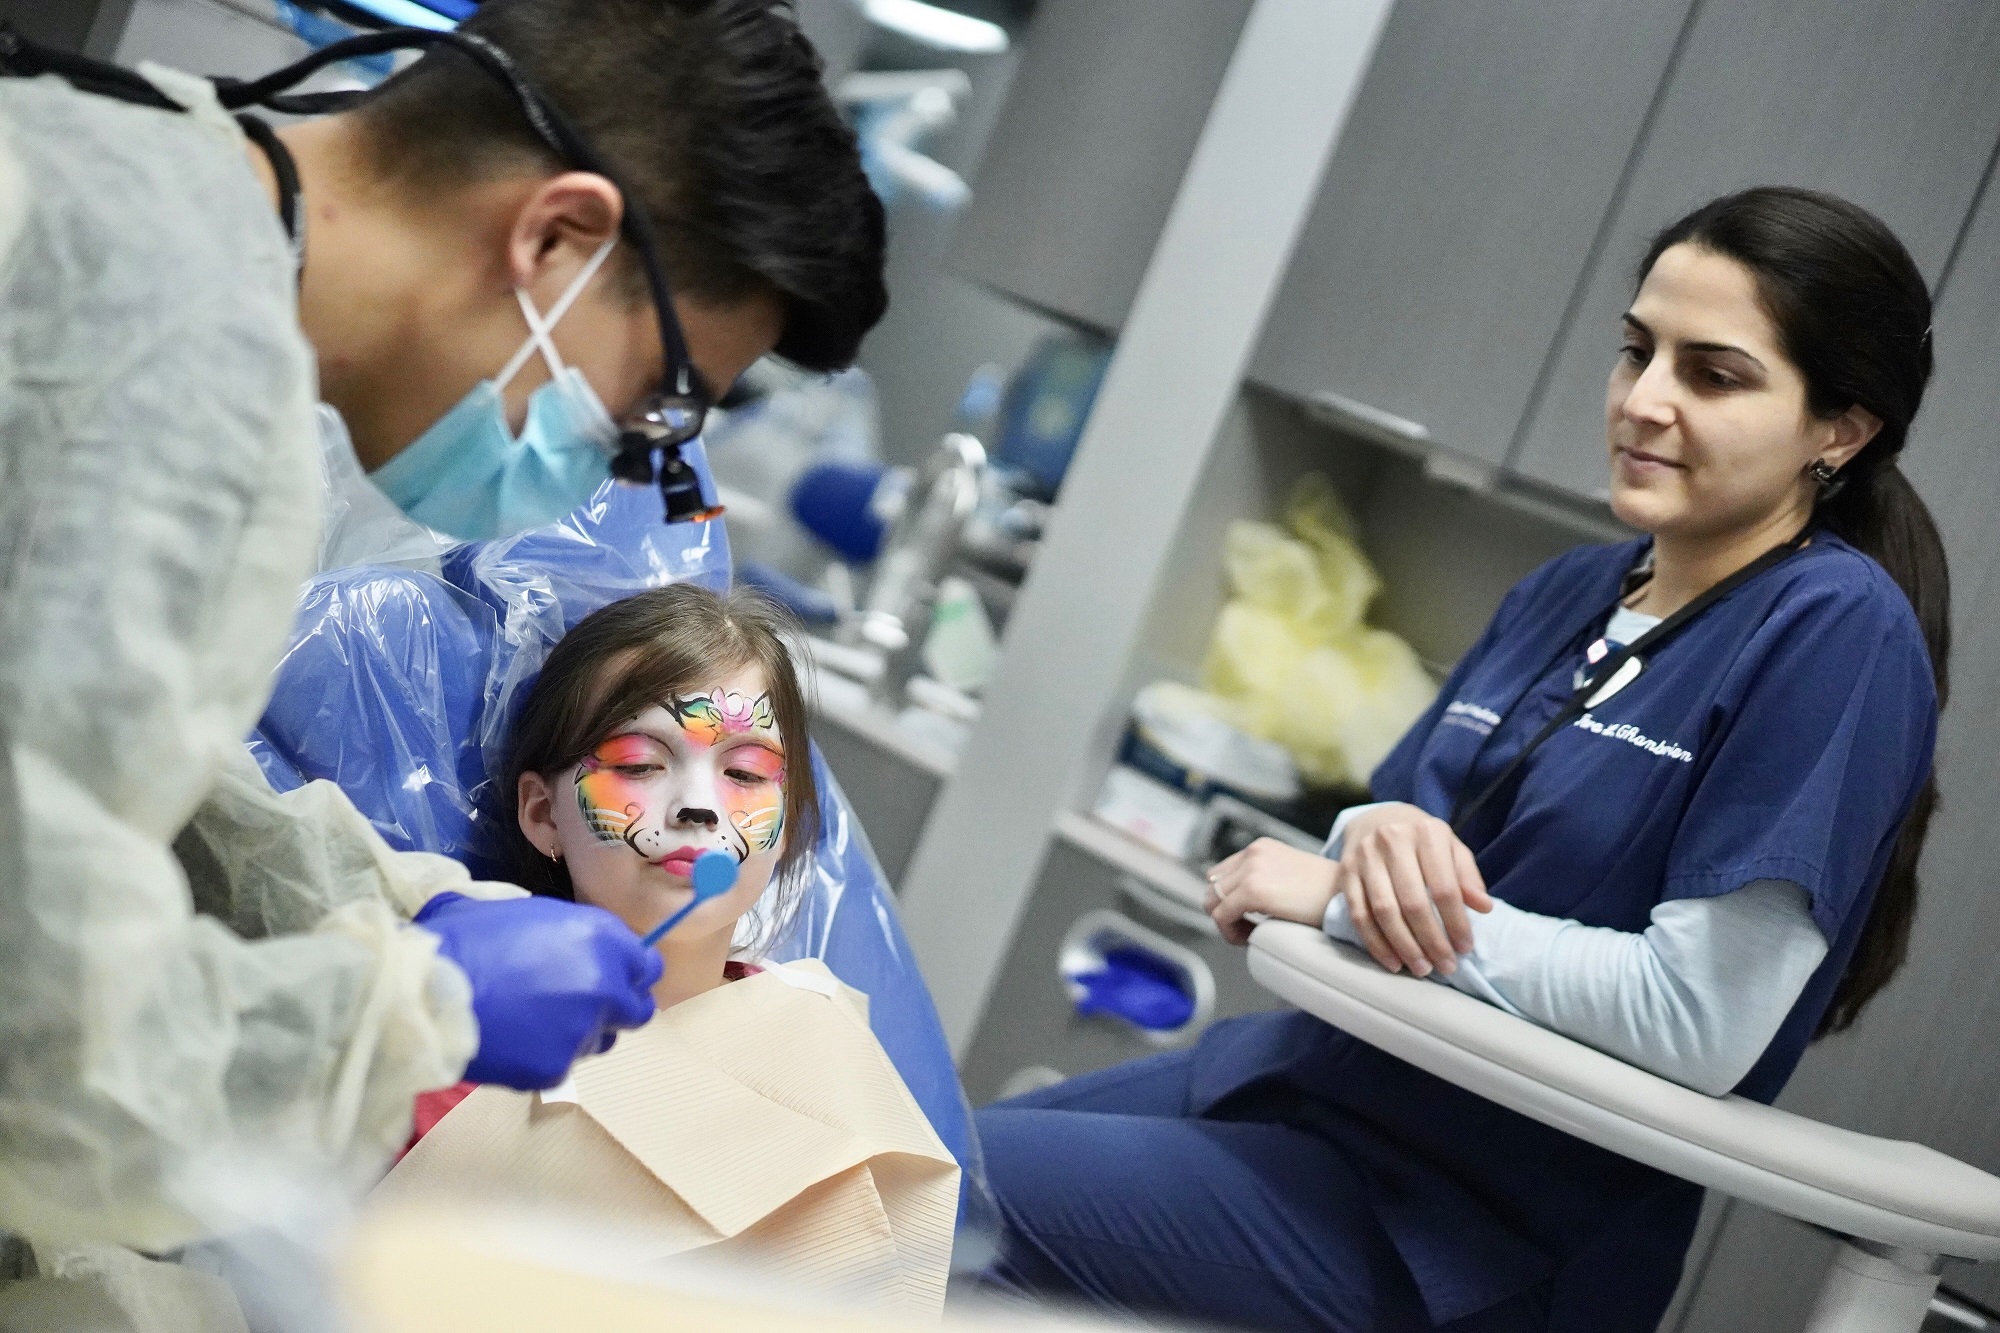 TCDM students provided free dental care to nearly 50 children, including 9-year-old Amanda Buttone of Ossining at the 2nd annual Give Kids A Smile Day!